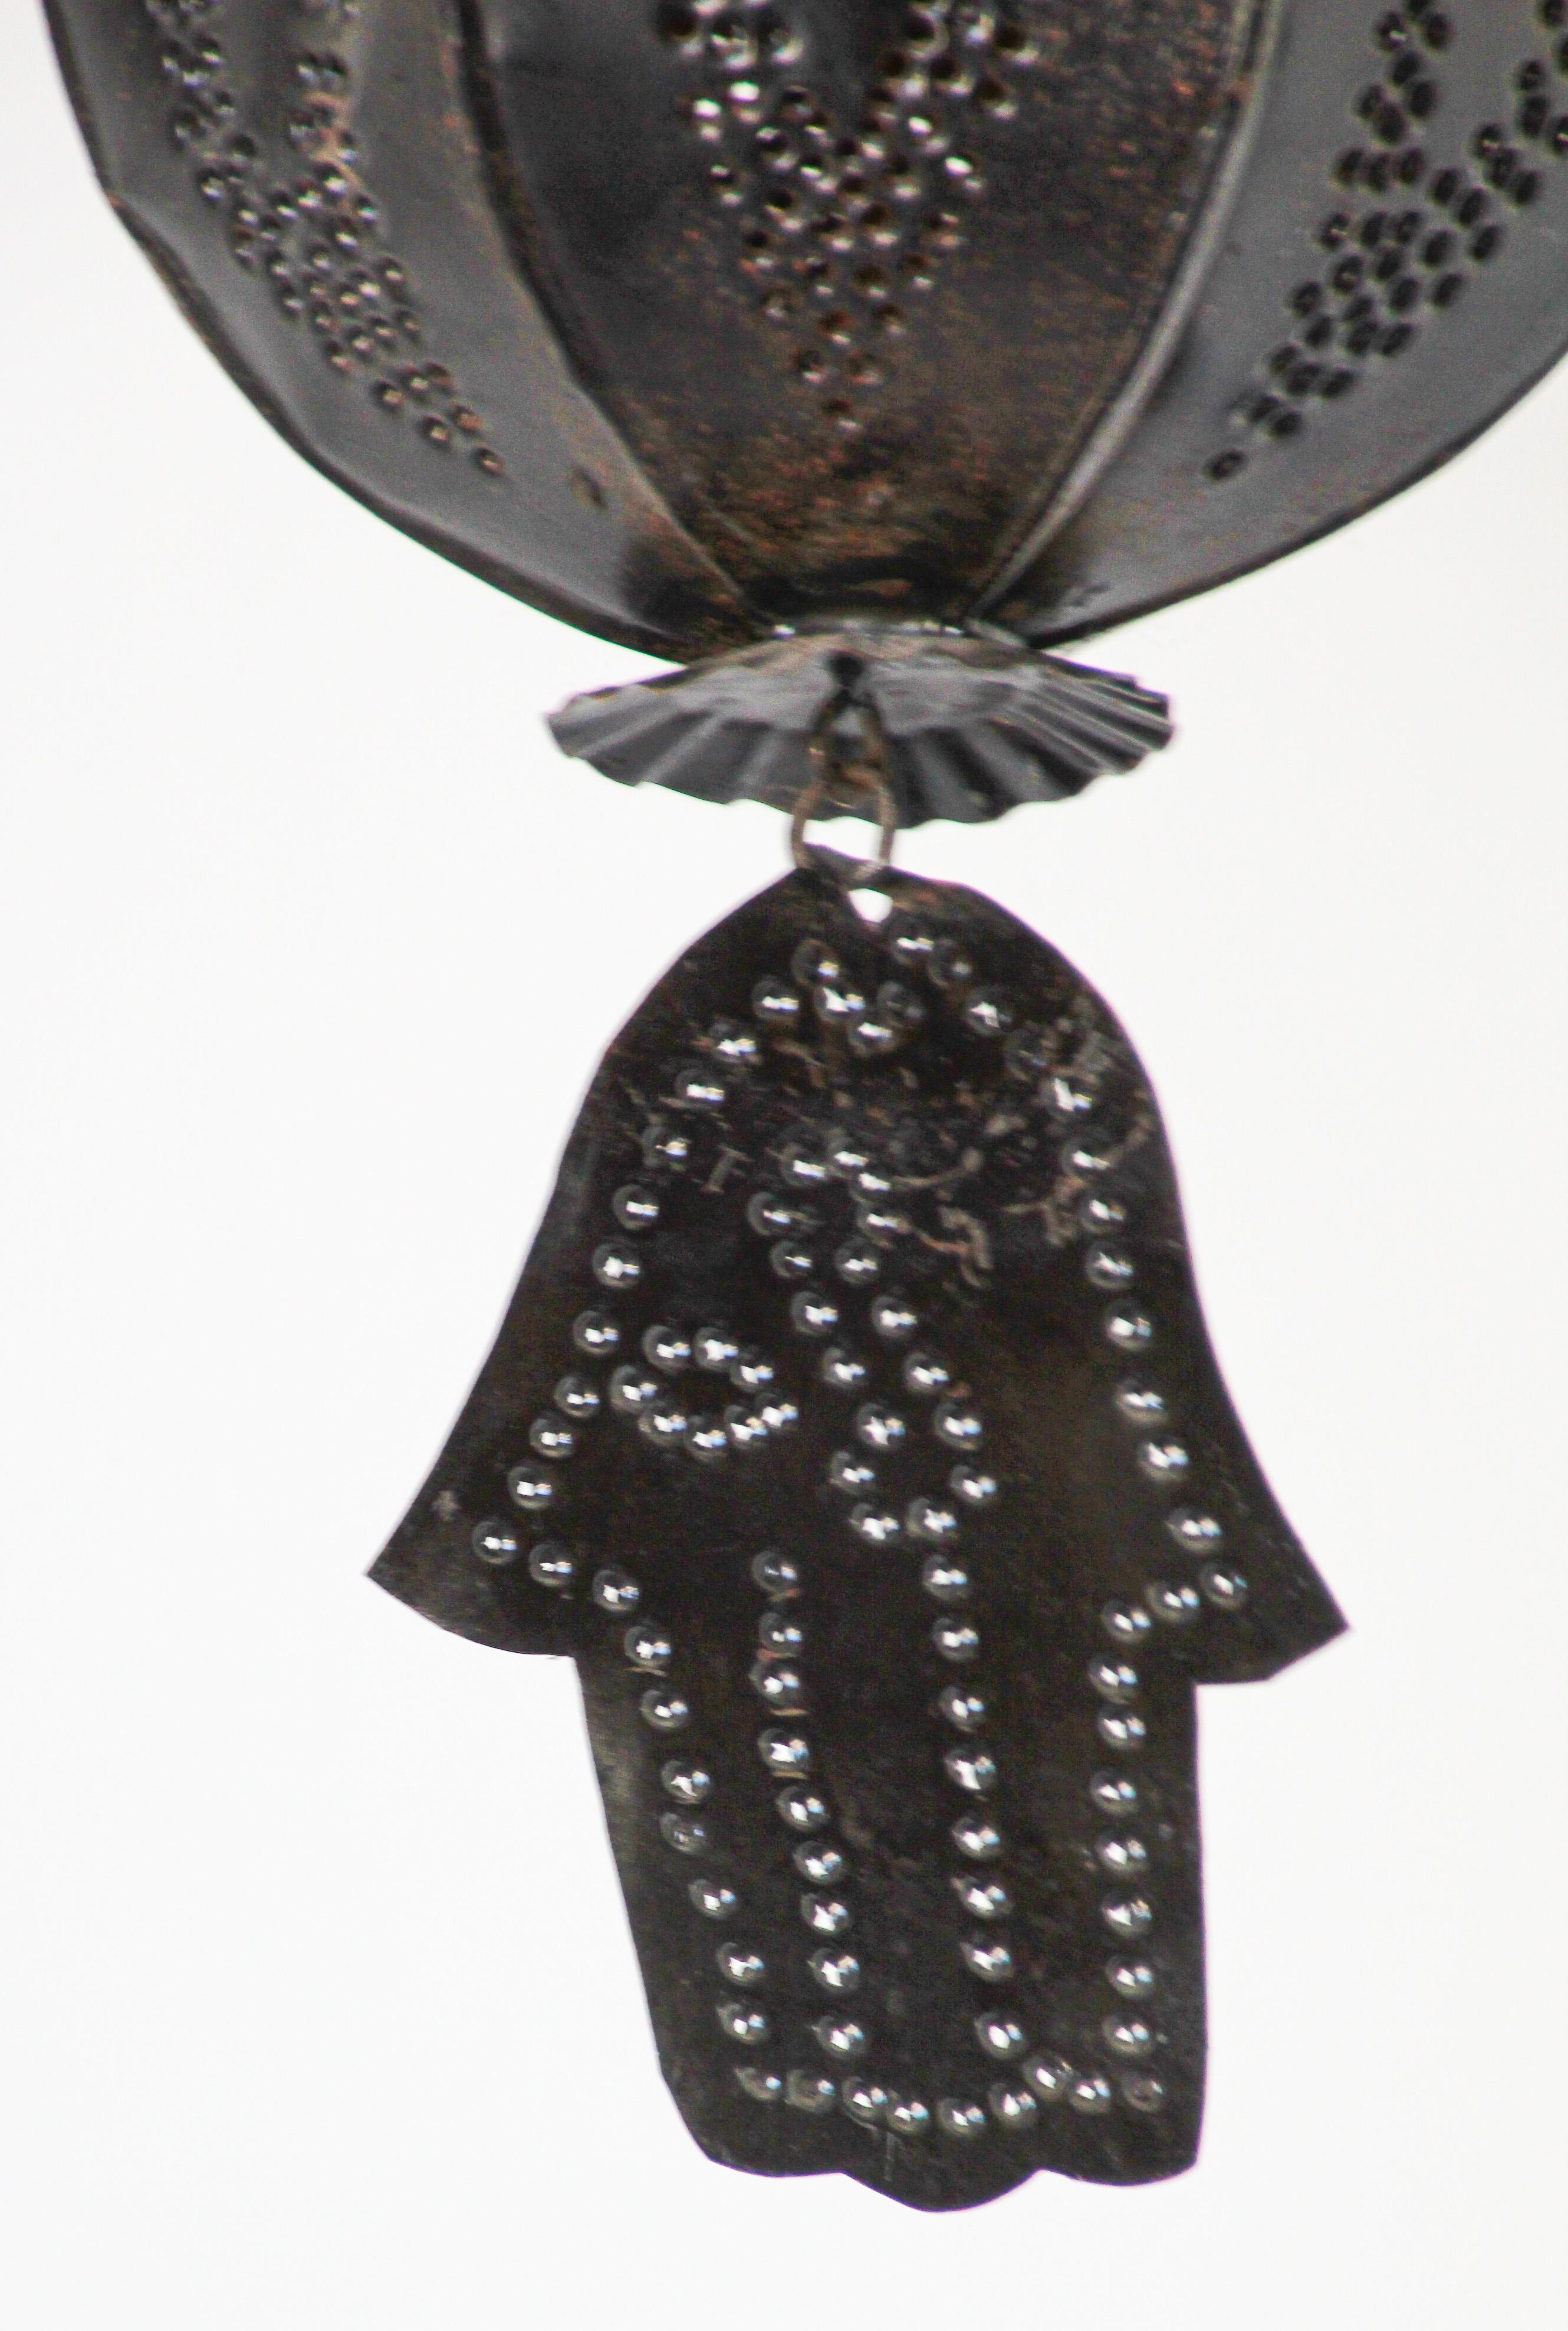 Moroccan Handcrafted Metal Lantern Pendant, North Africa For Sale 3